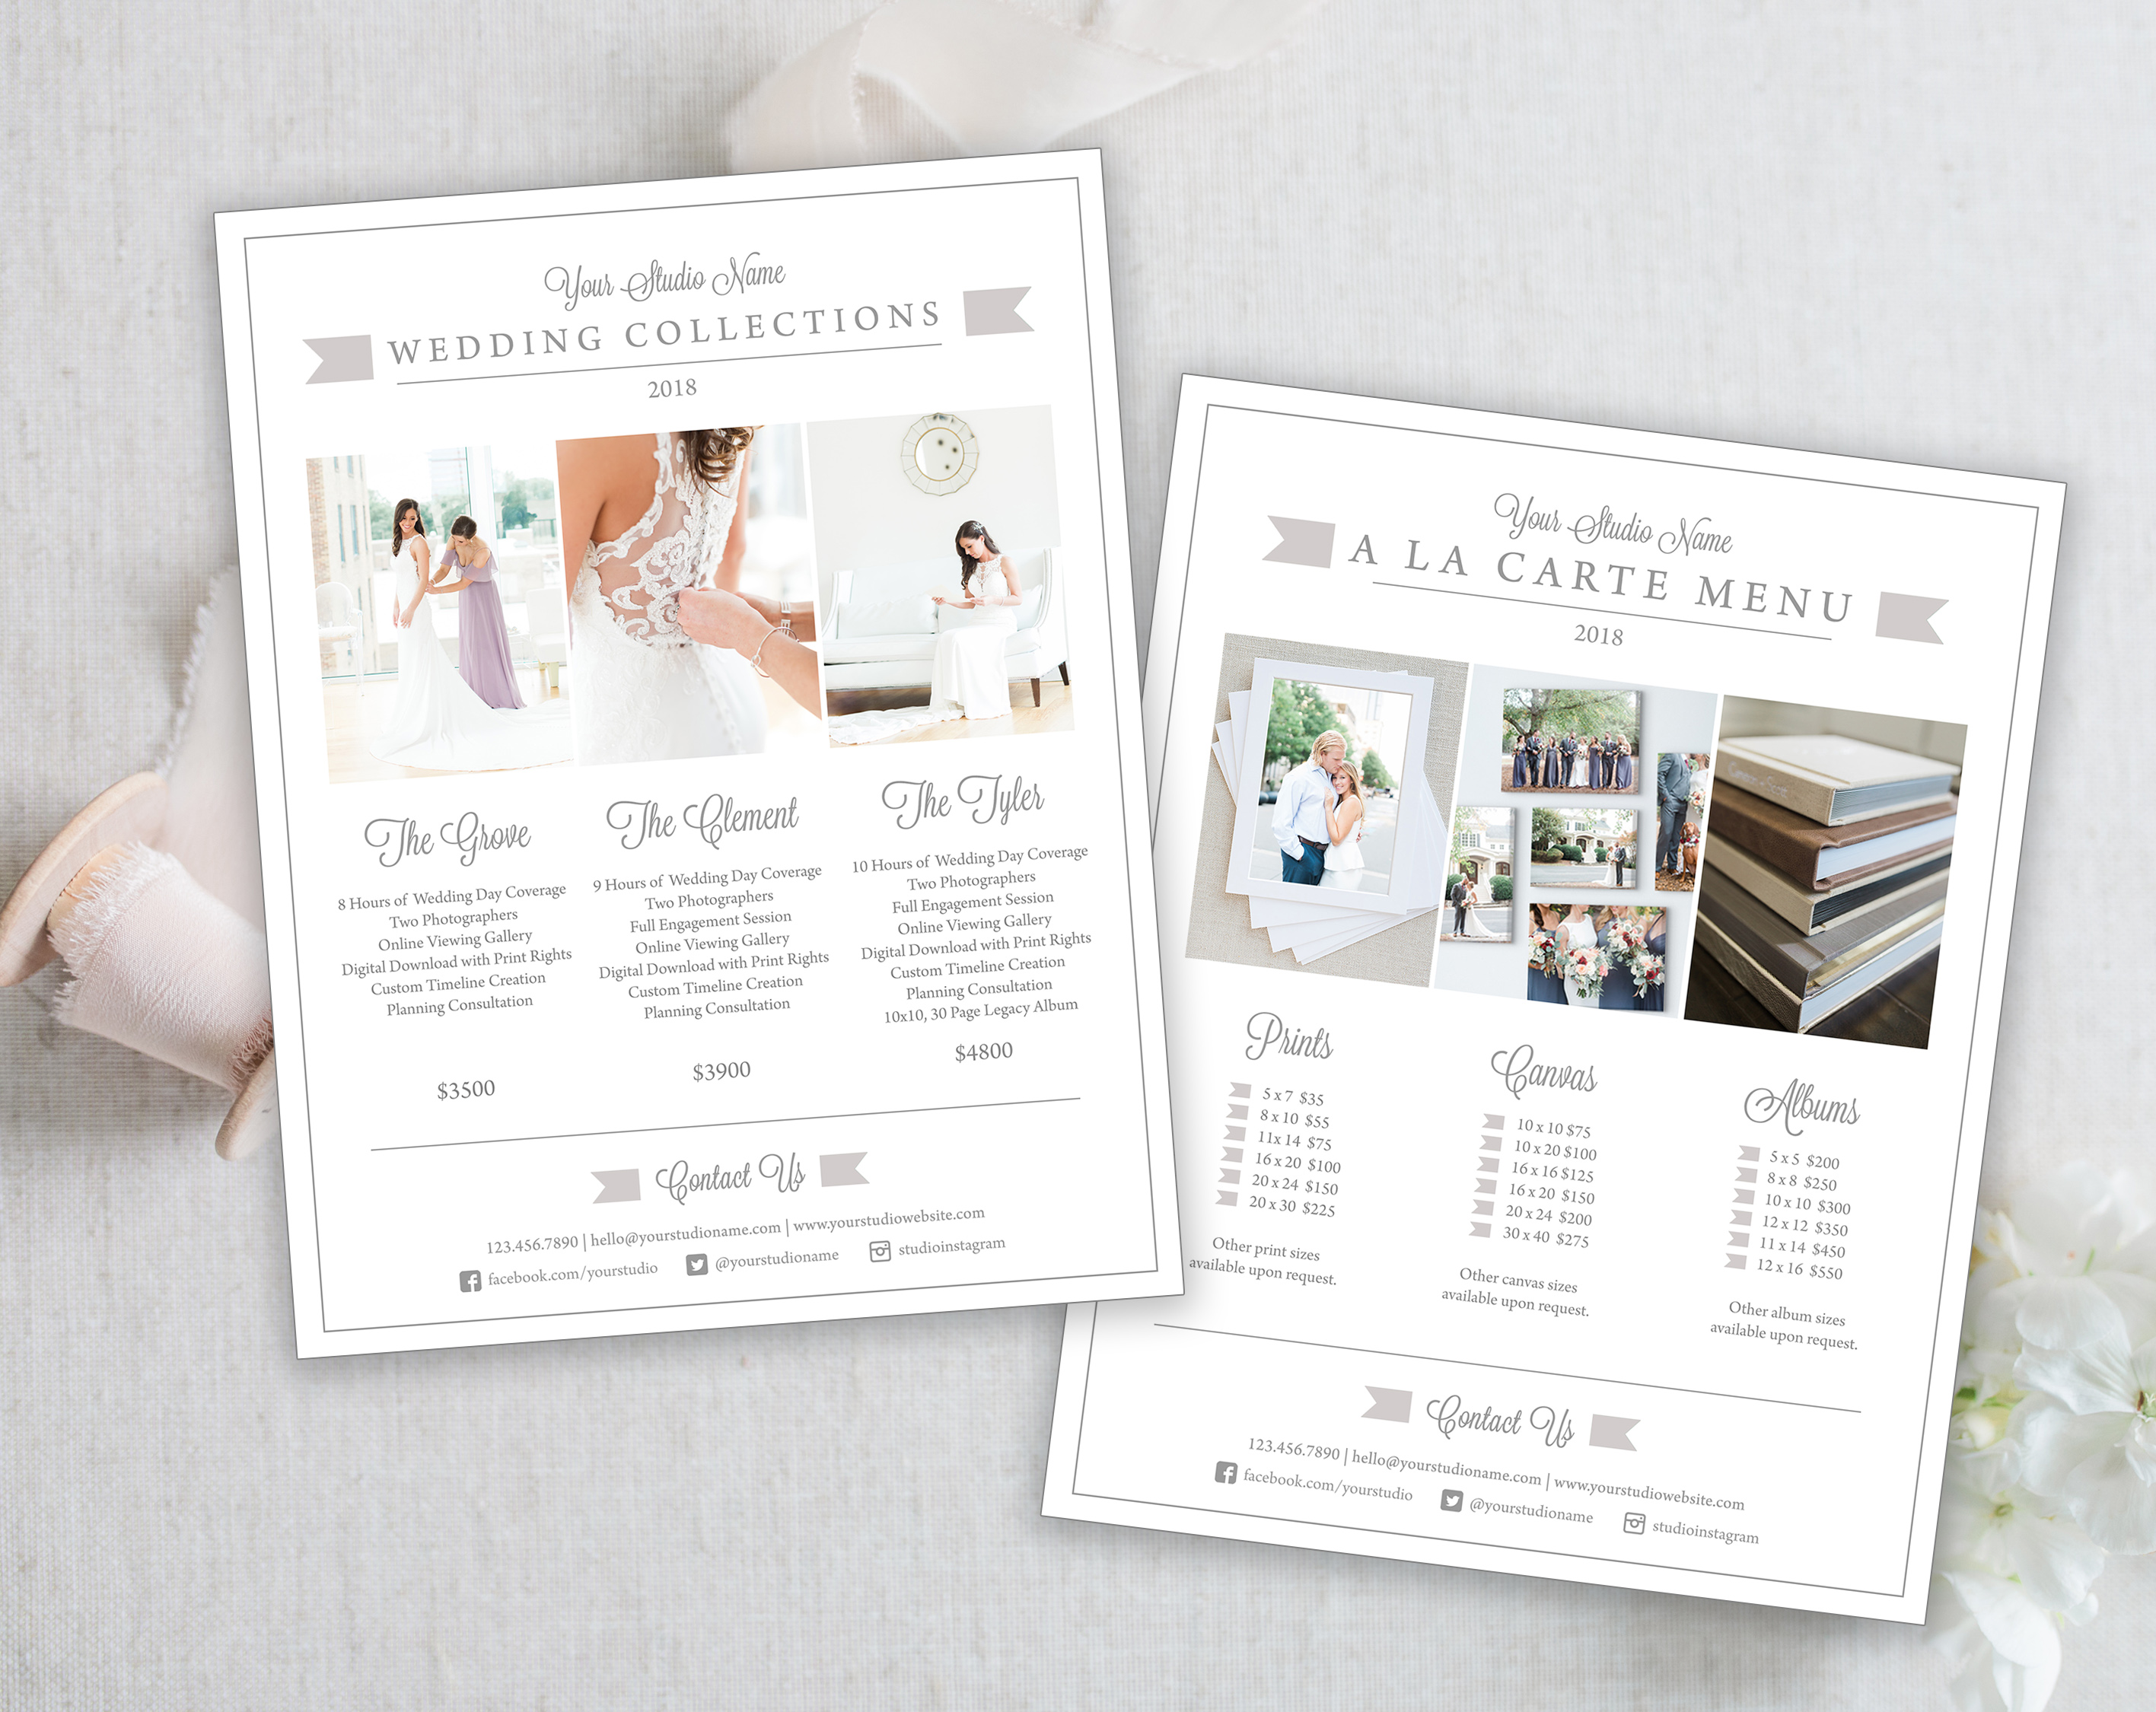 Wedding Collections Pricing Guide Templates